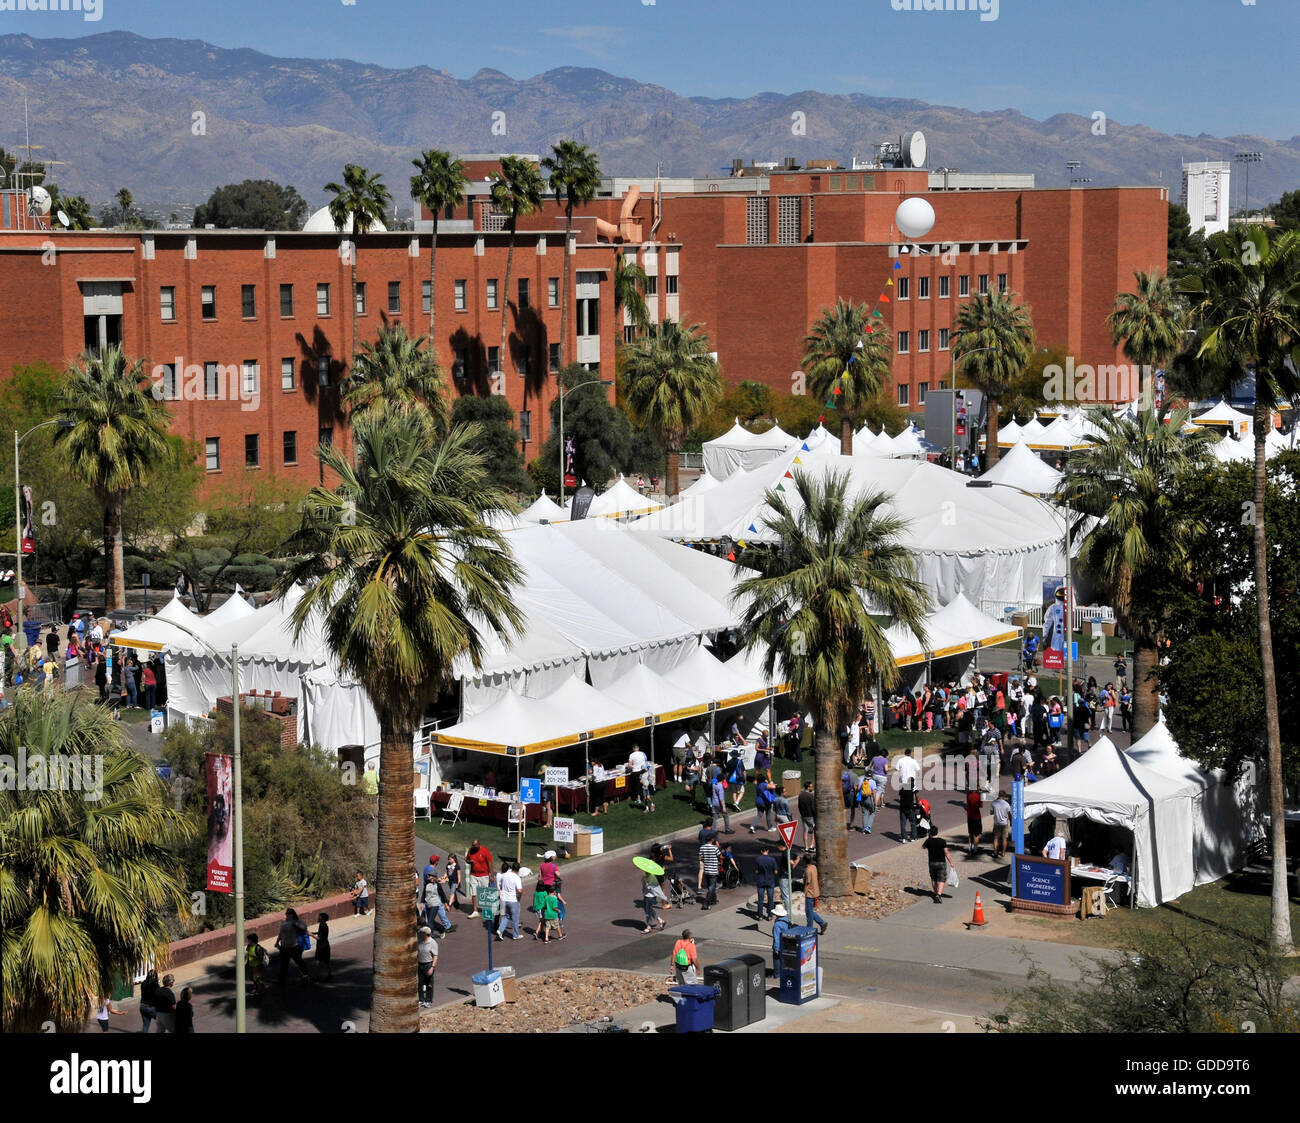 The Tucson Festival of Books at the University of Arizona is an annual